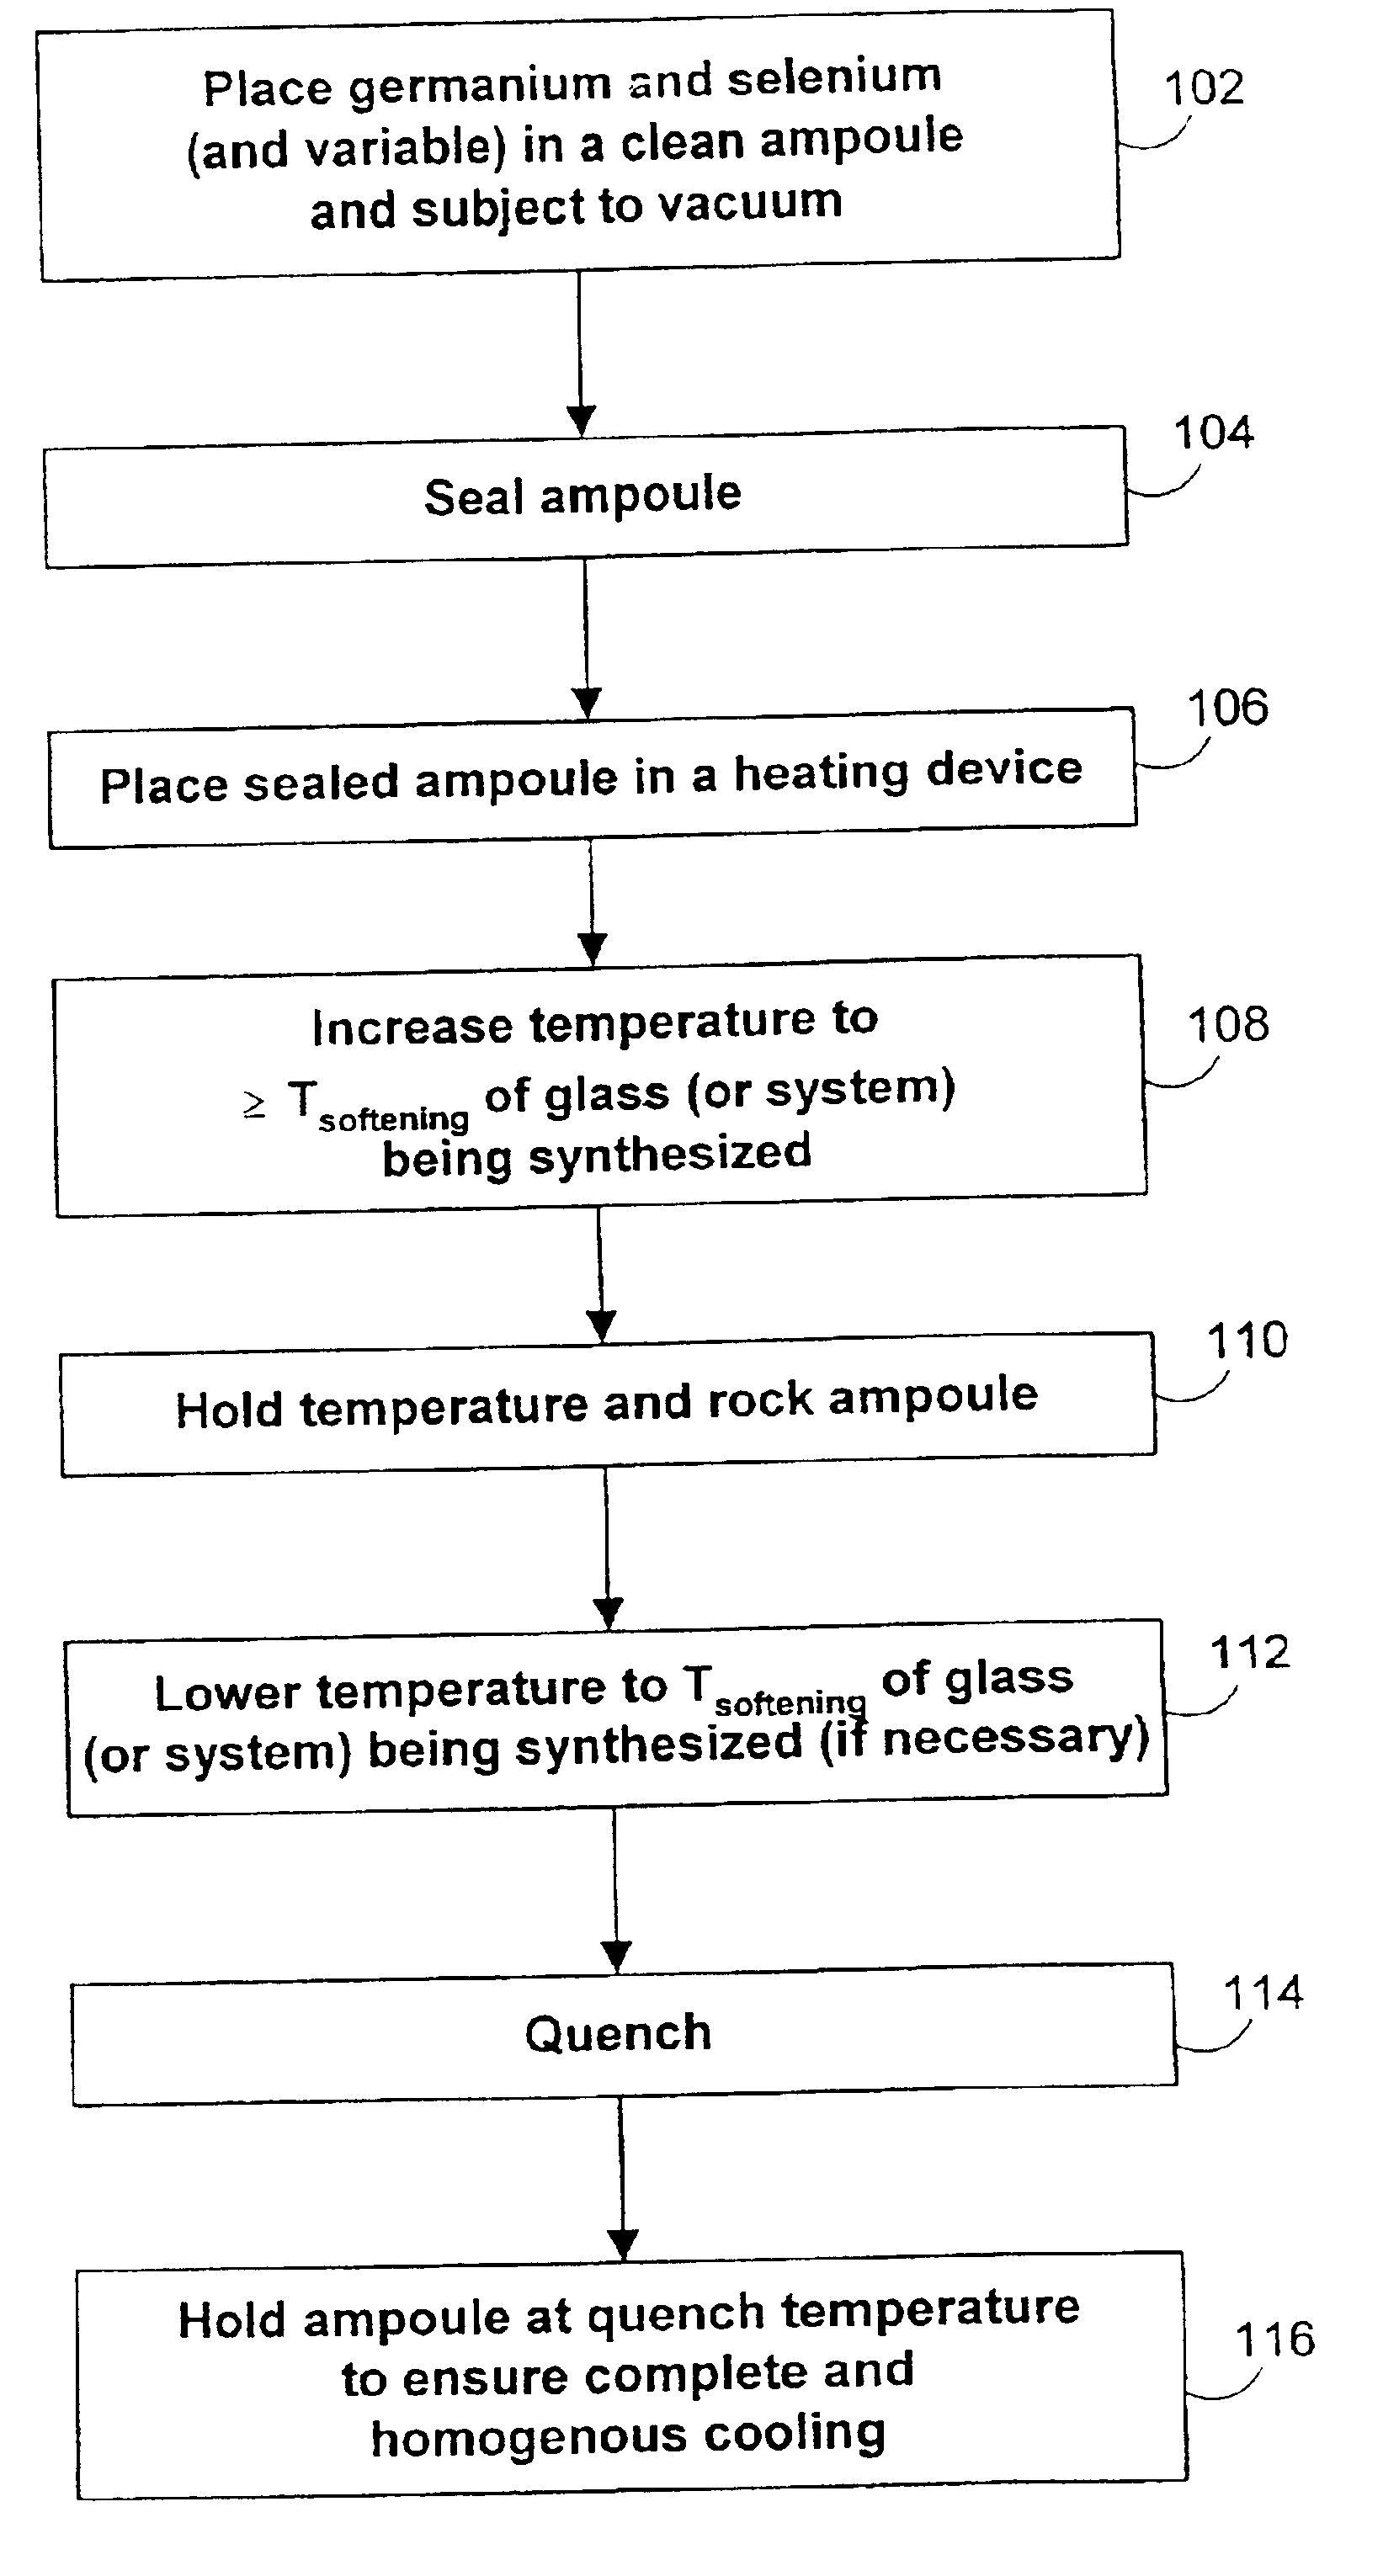 Large scale synthesis of germanium selenide glass and germanium selenide glass compounds